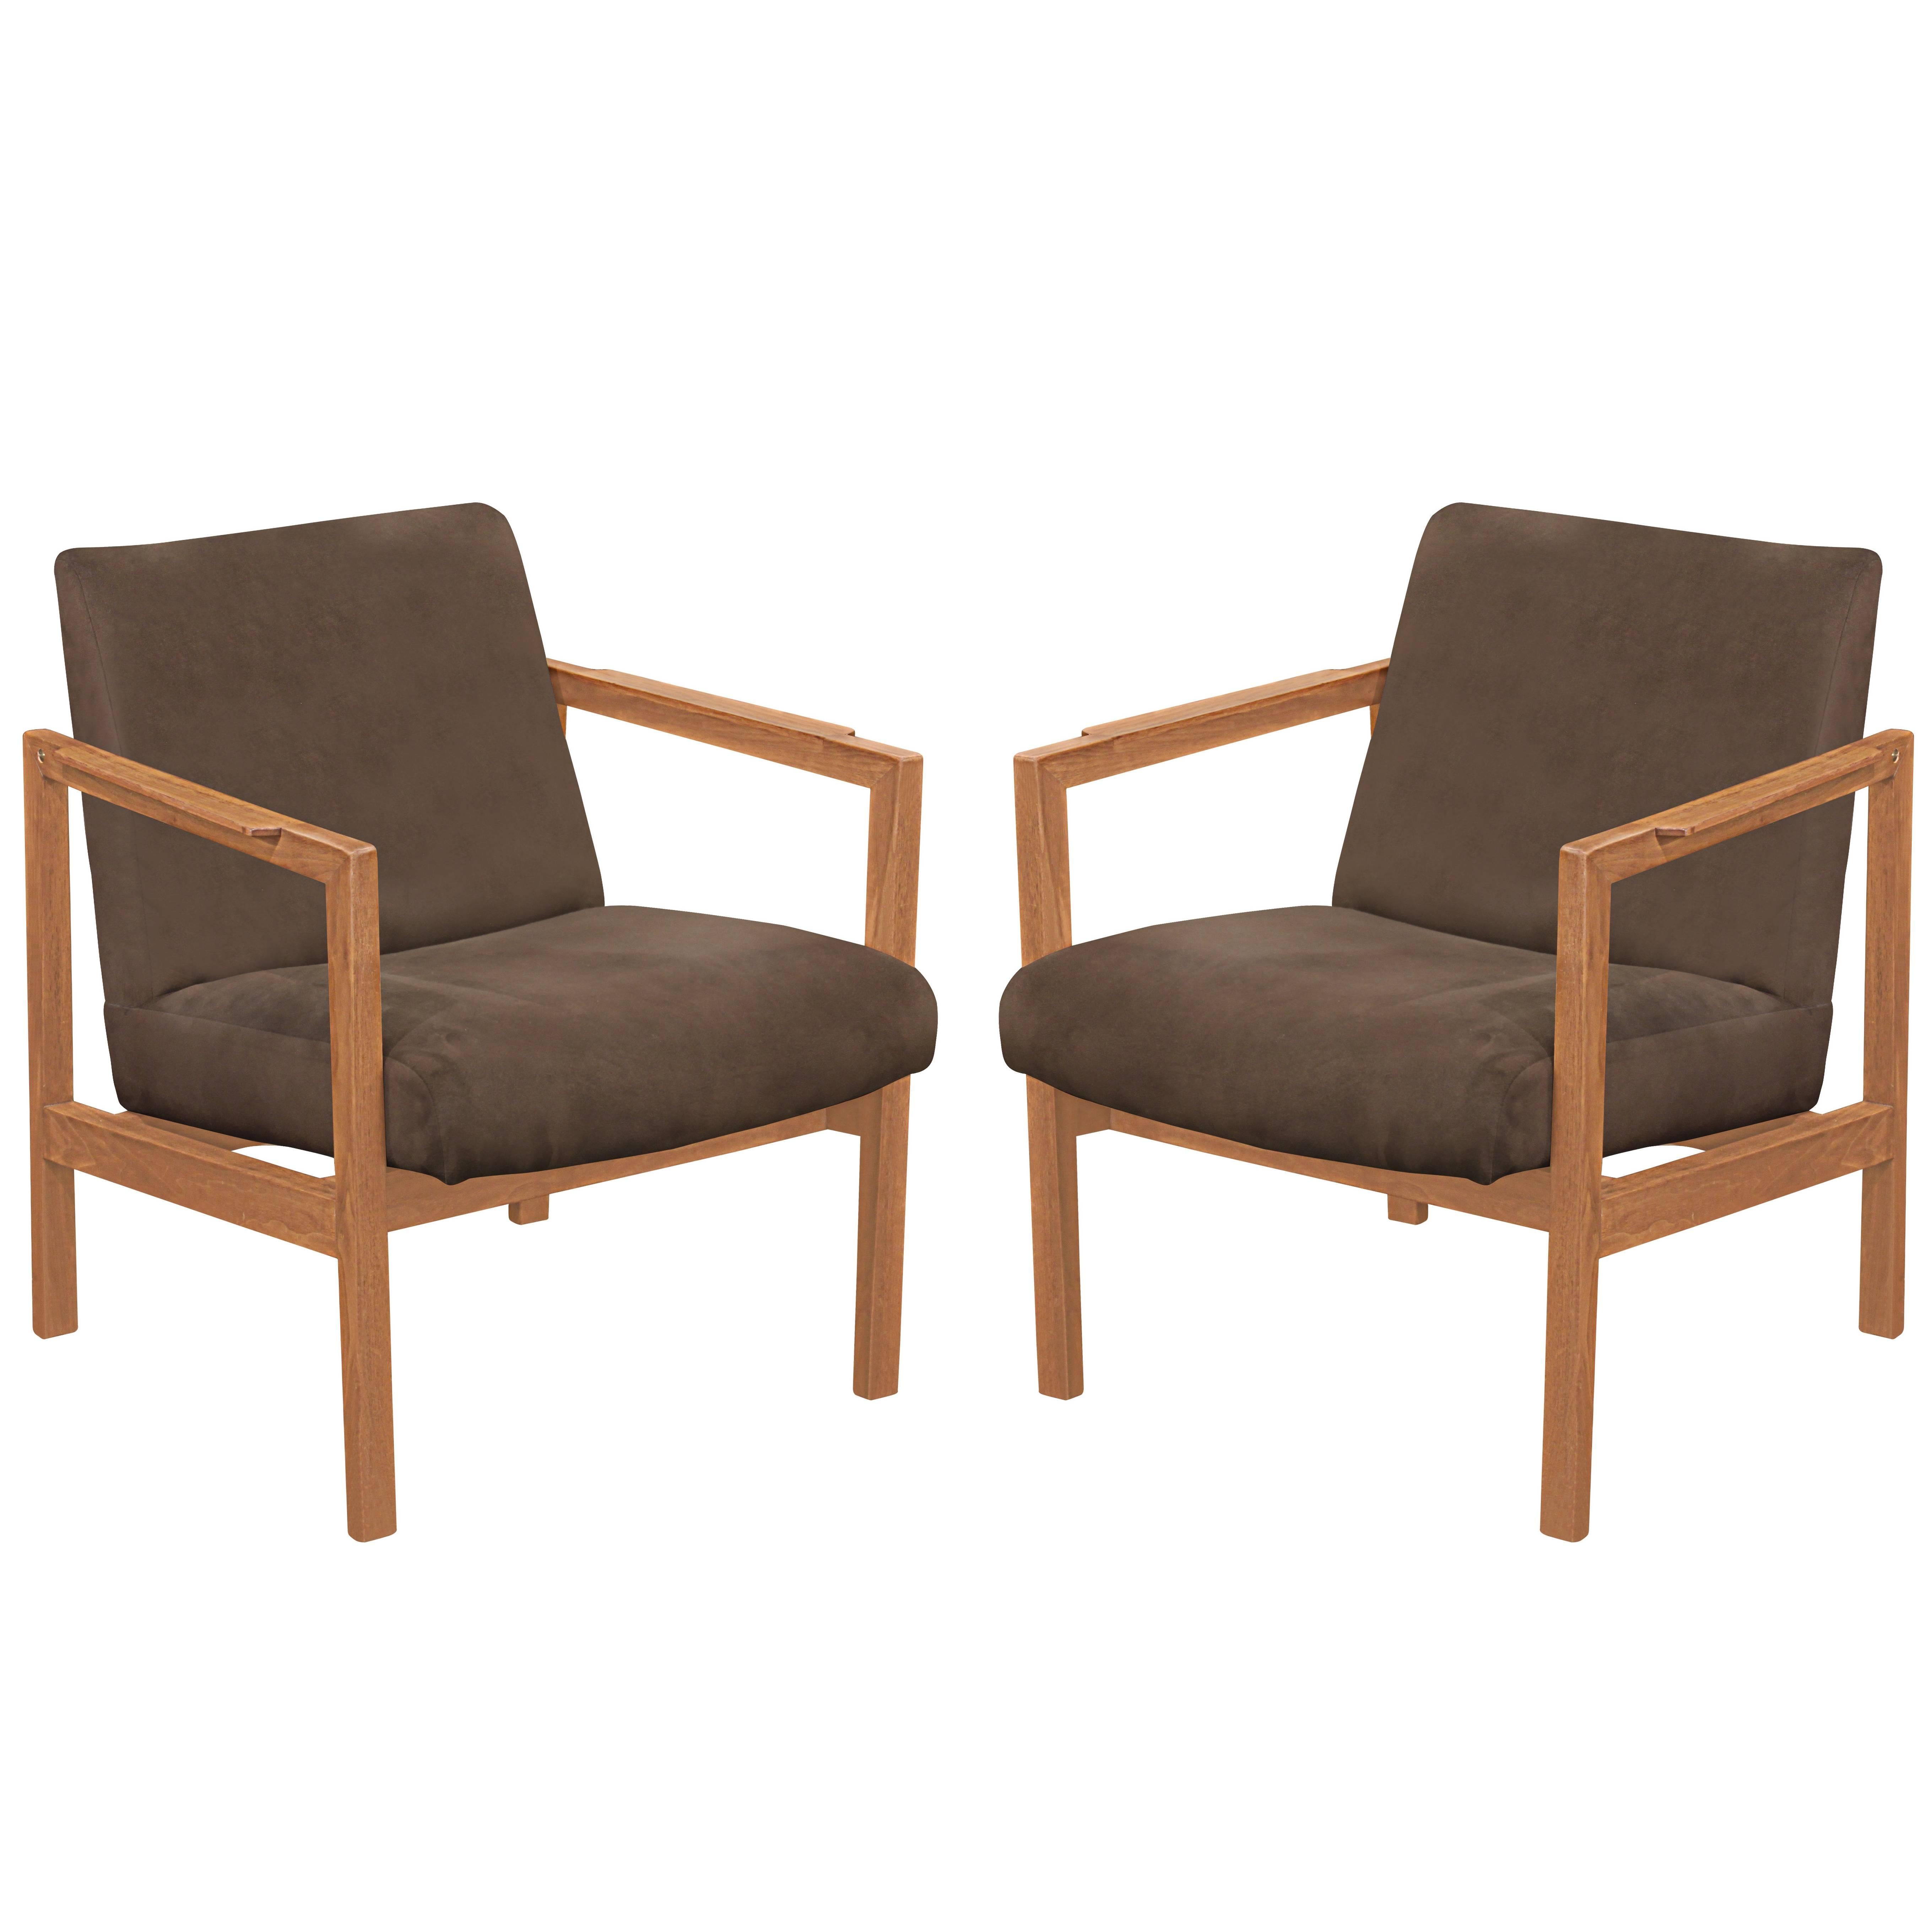 Pair of Open Arm Lounge Chairs in Mahogany by Edward Wormley